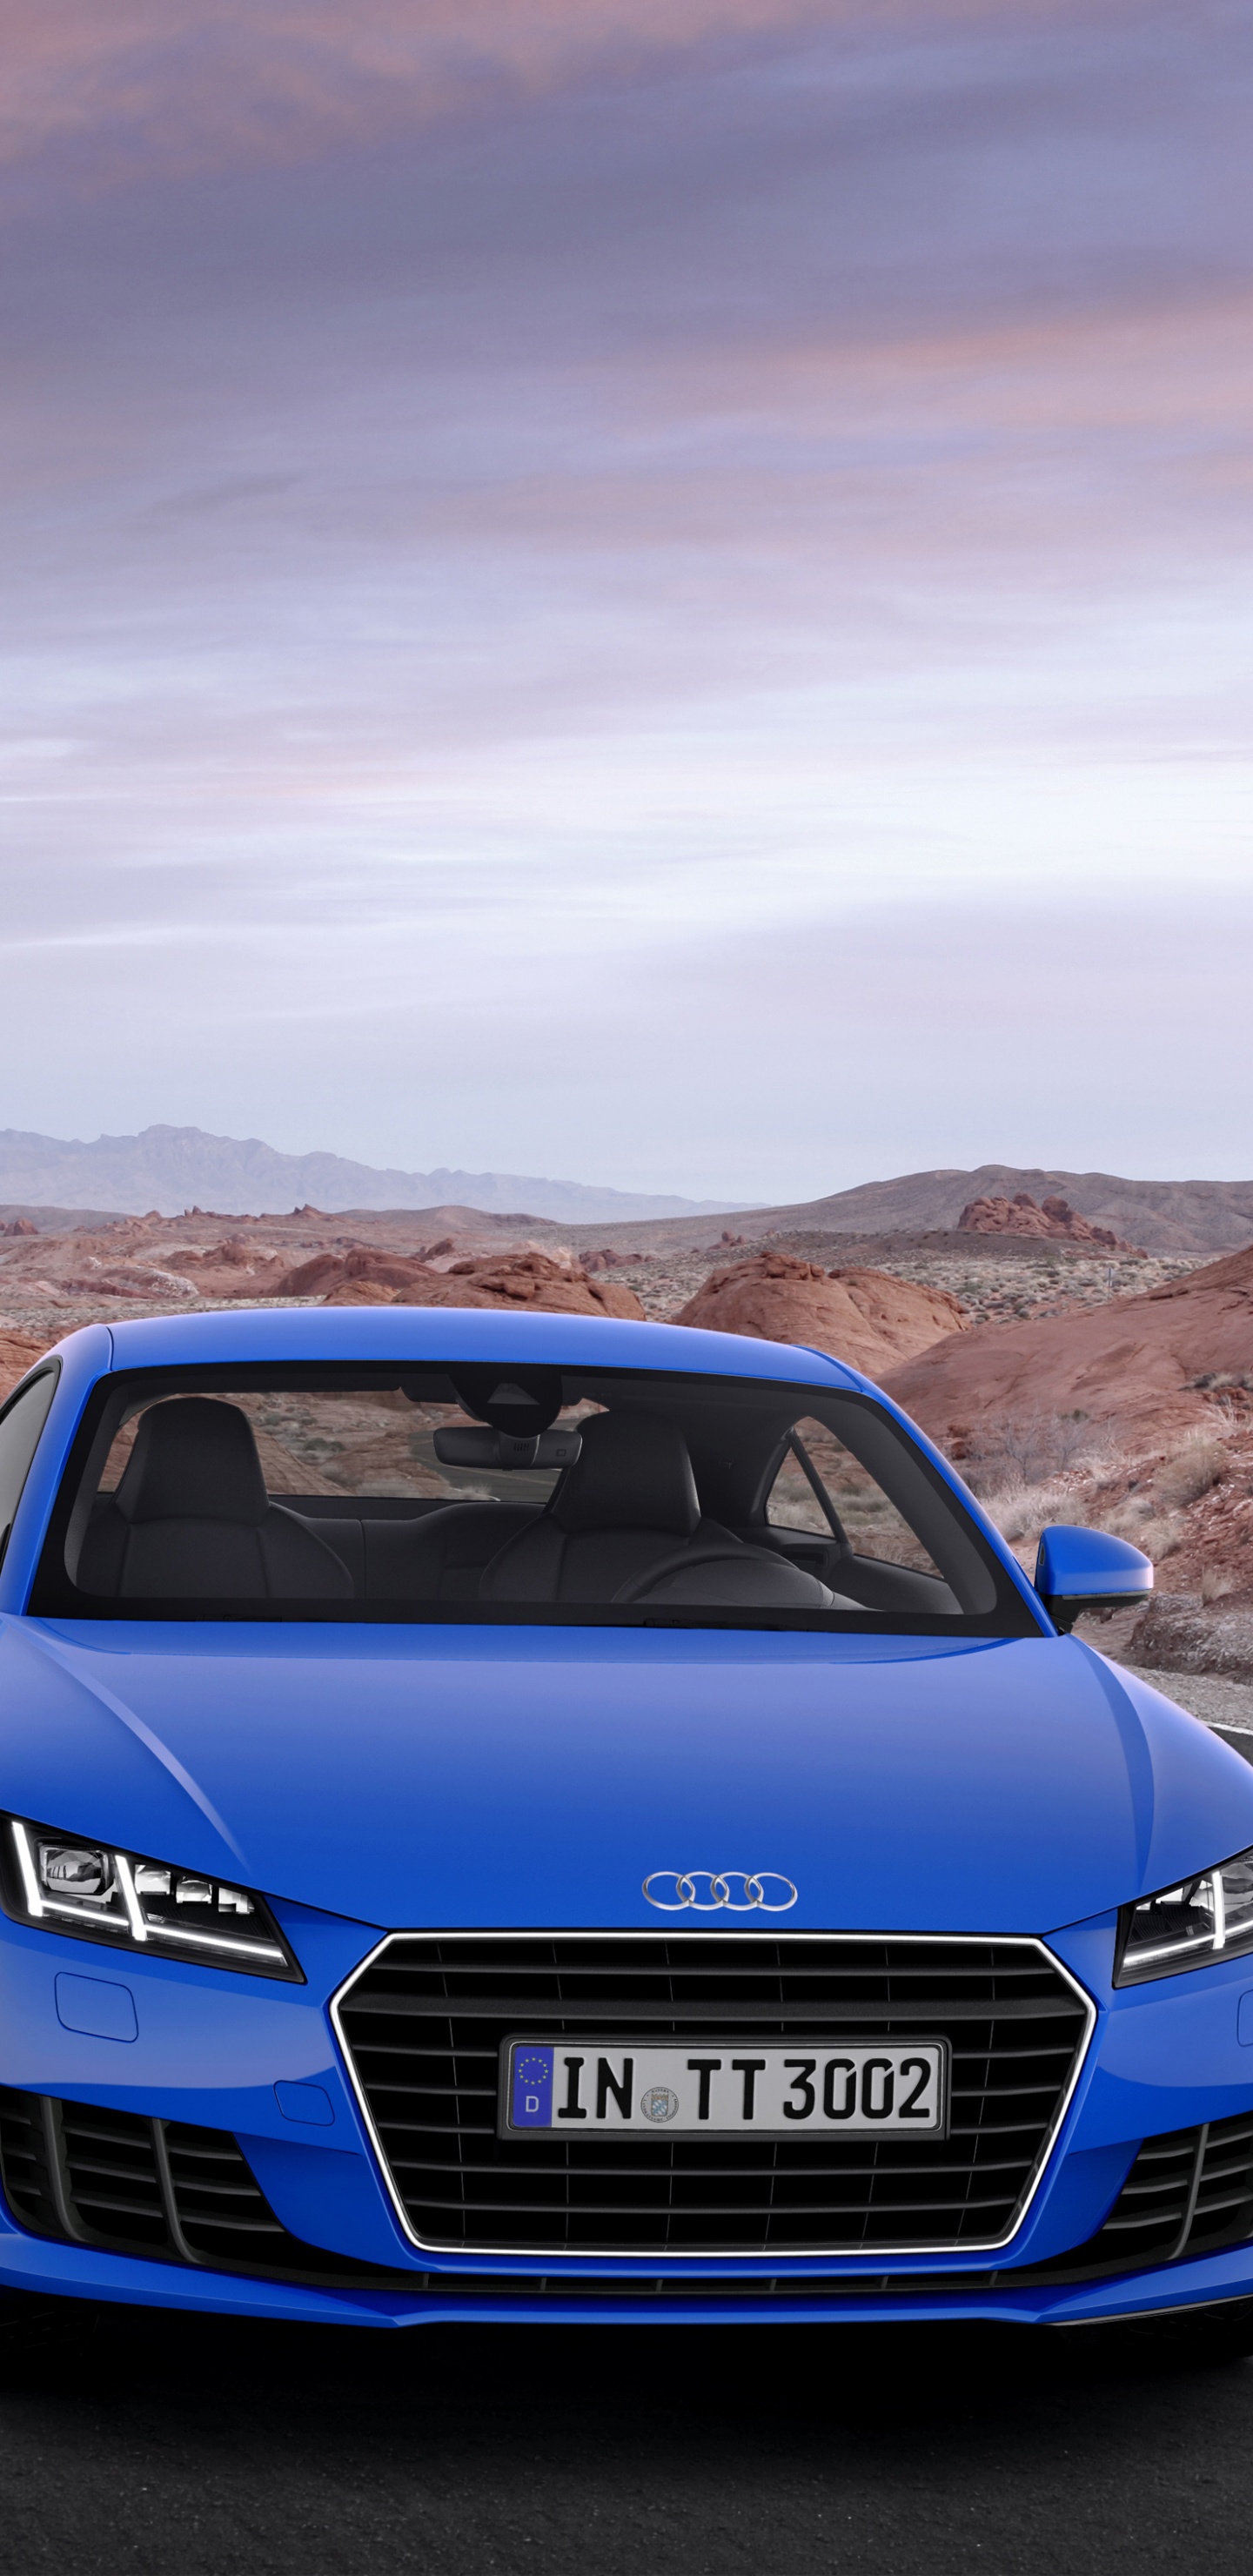 Blue Audi a 4 on Road During Daytime. Wallpaper in 1440x2960 Resolution